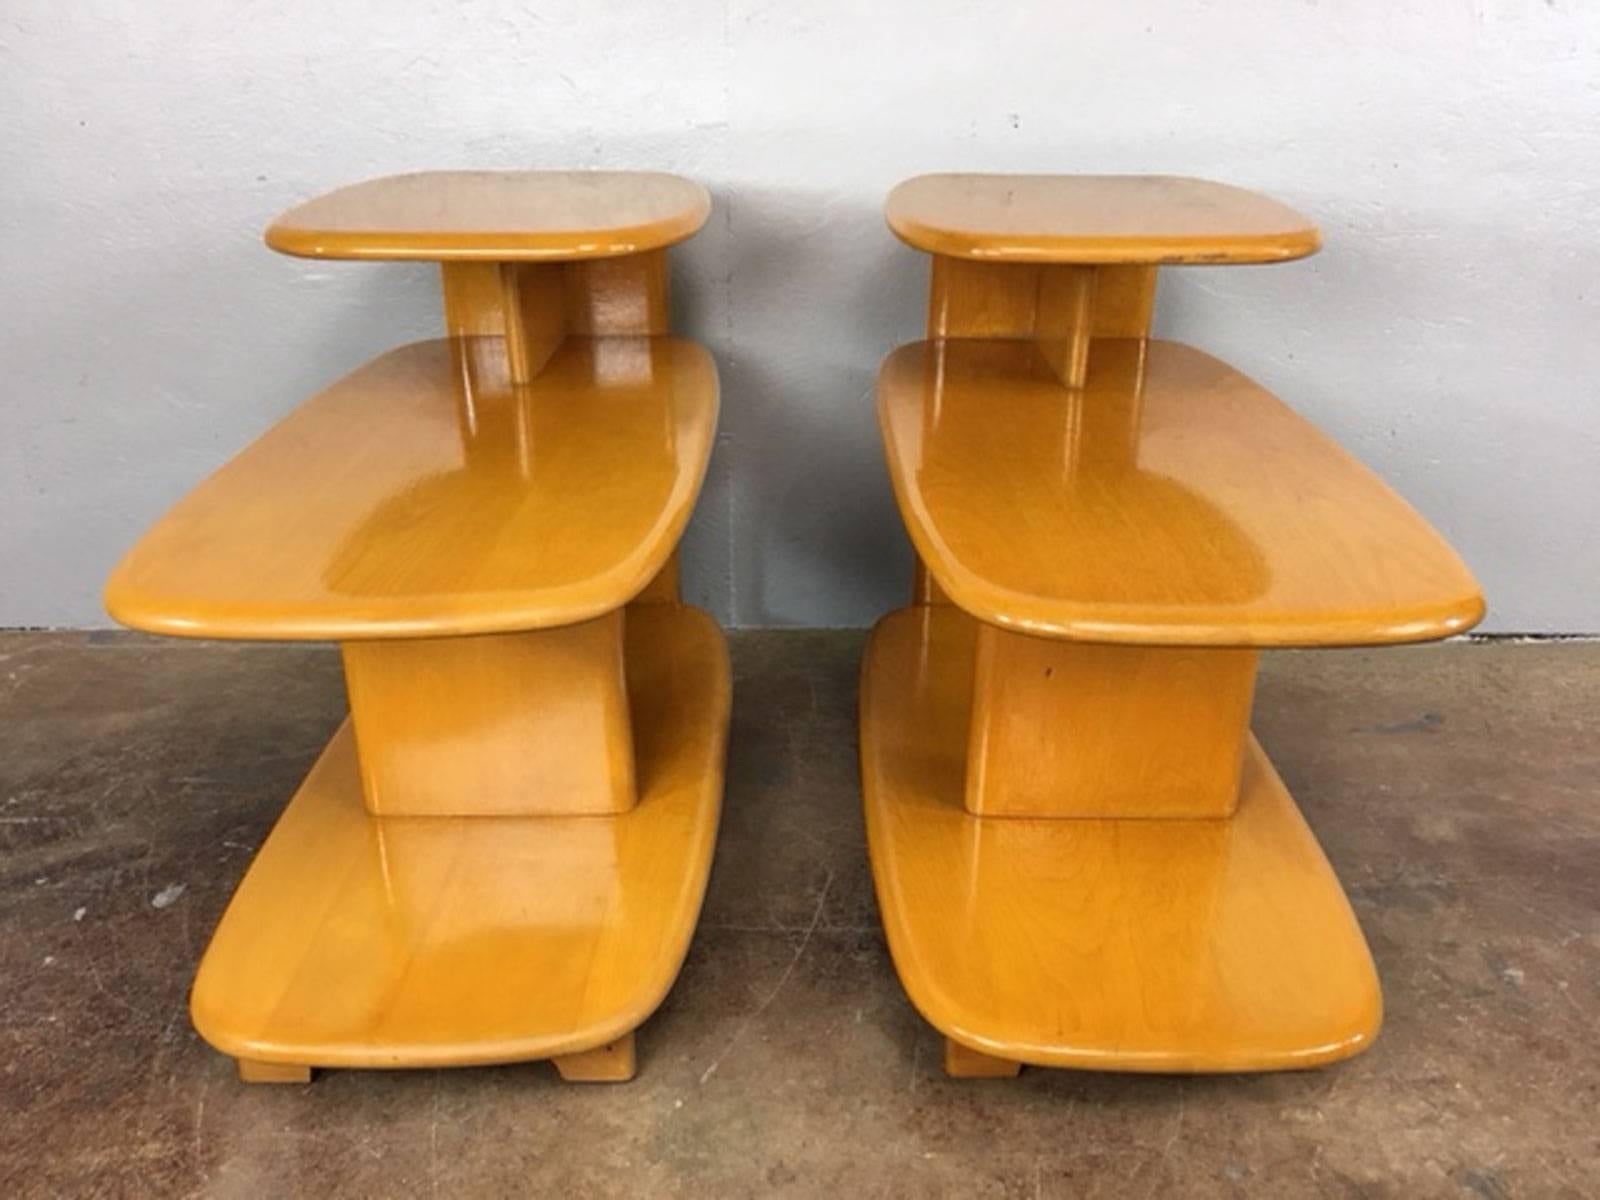 Original acquisition condition pair of Heywood Wakefiled side or end tables, circa 1950s.